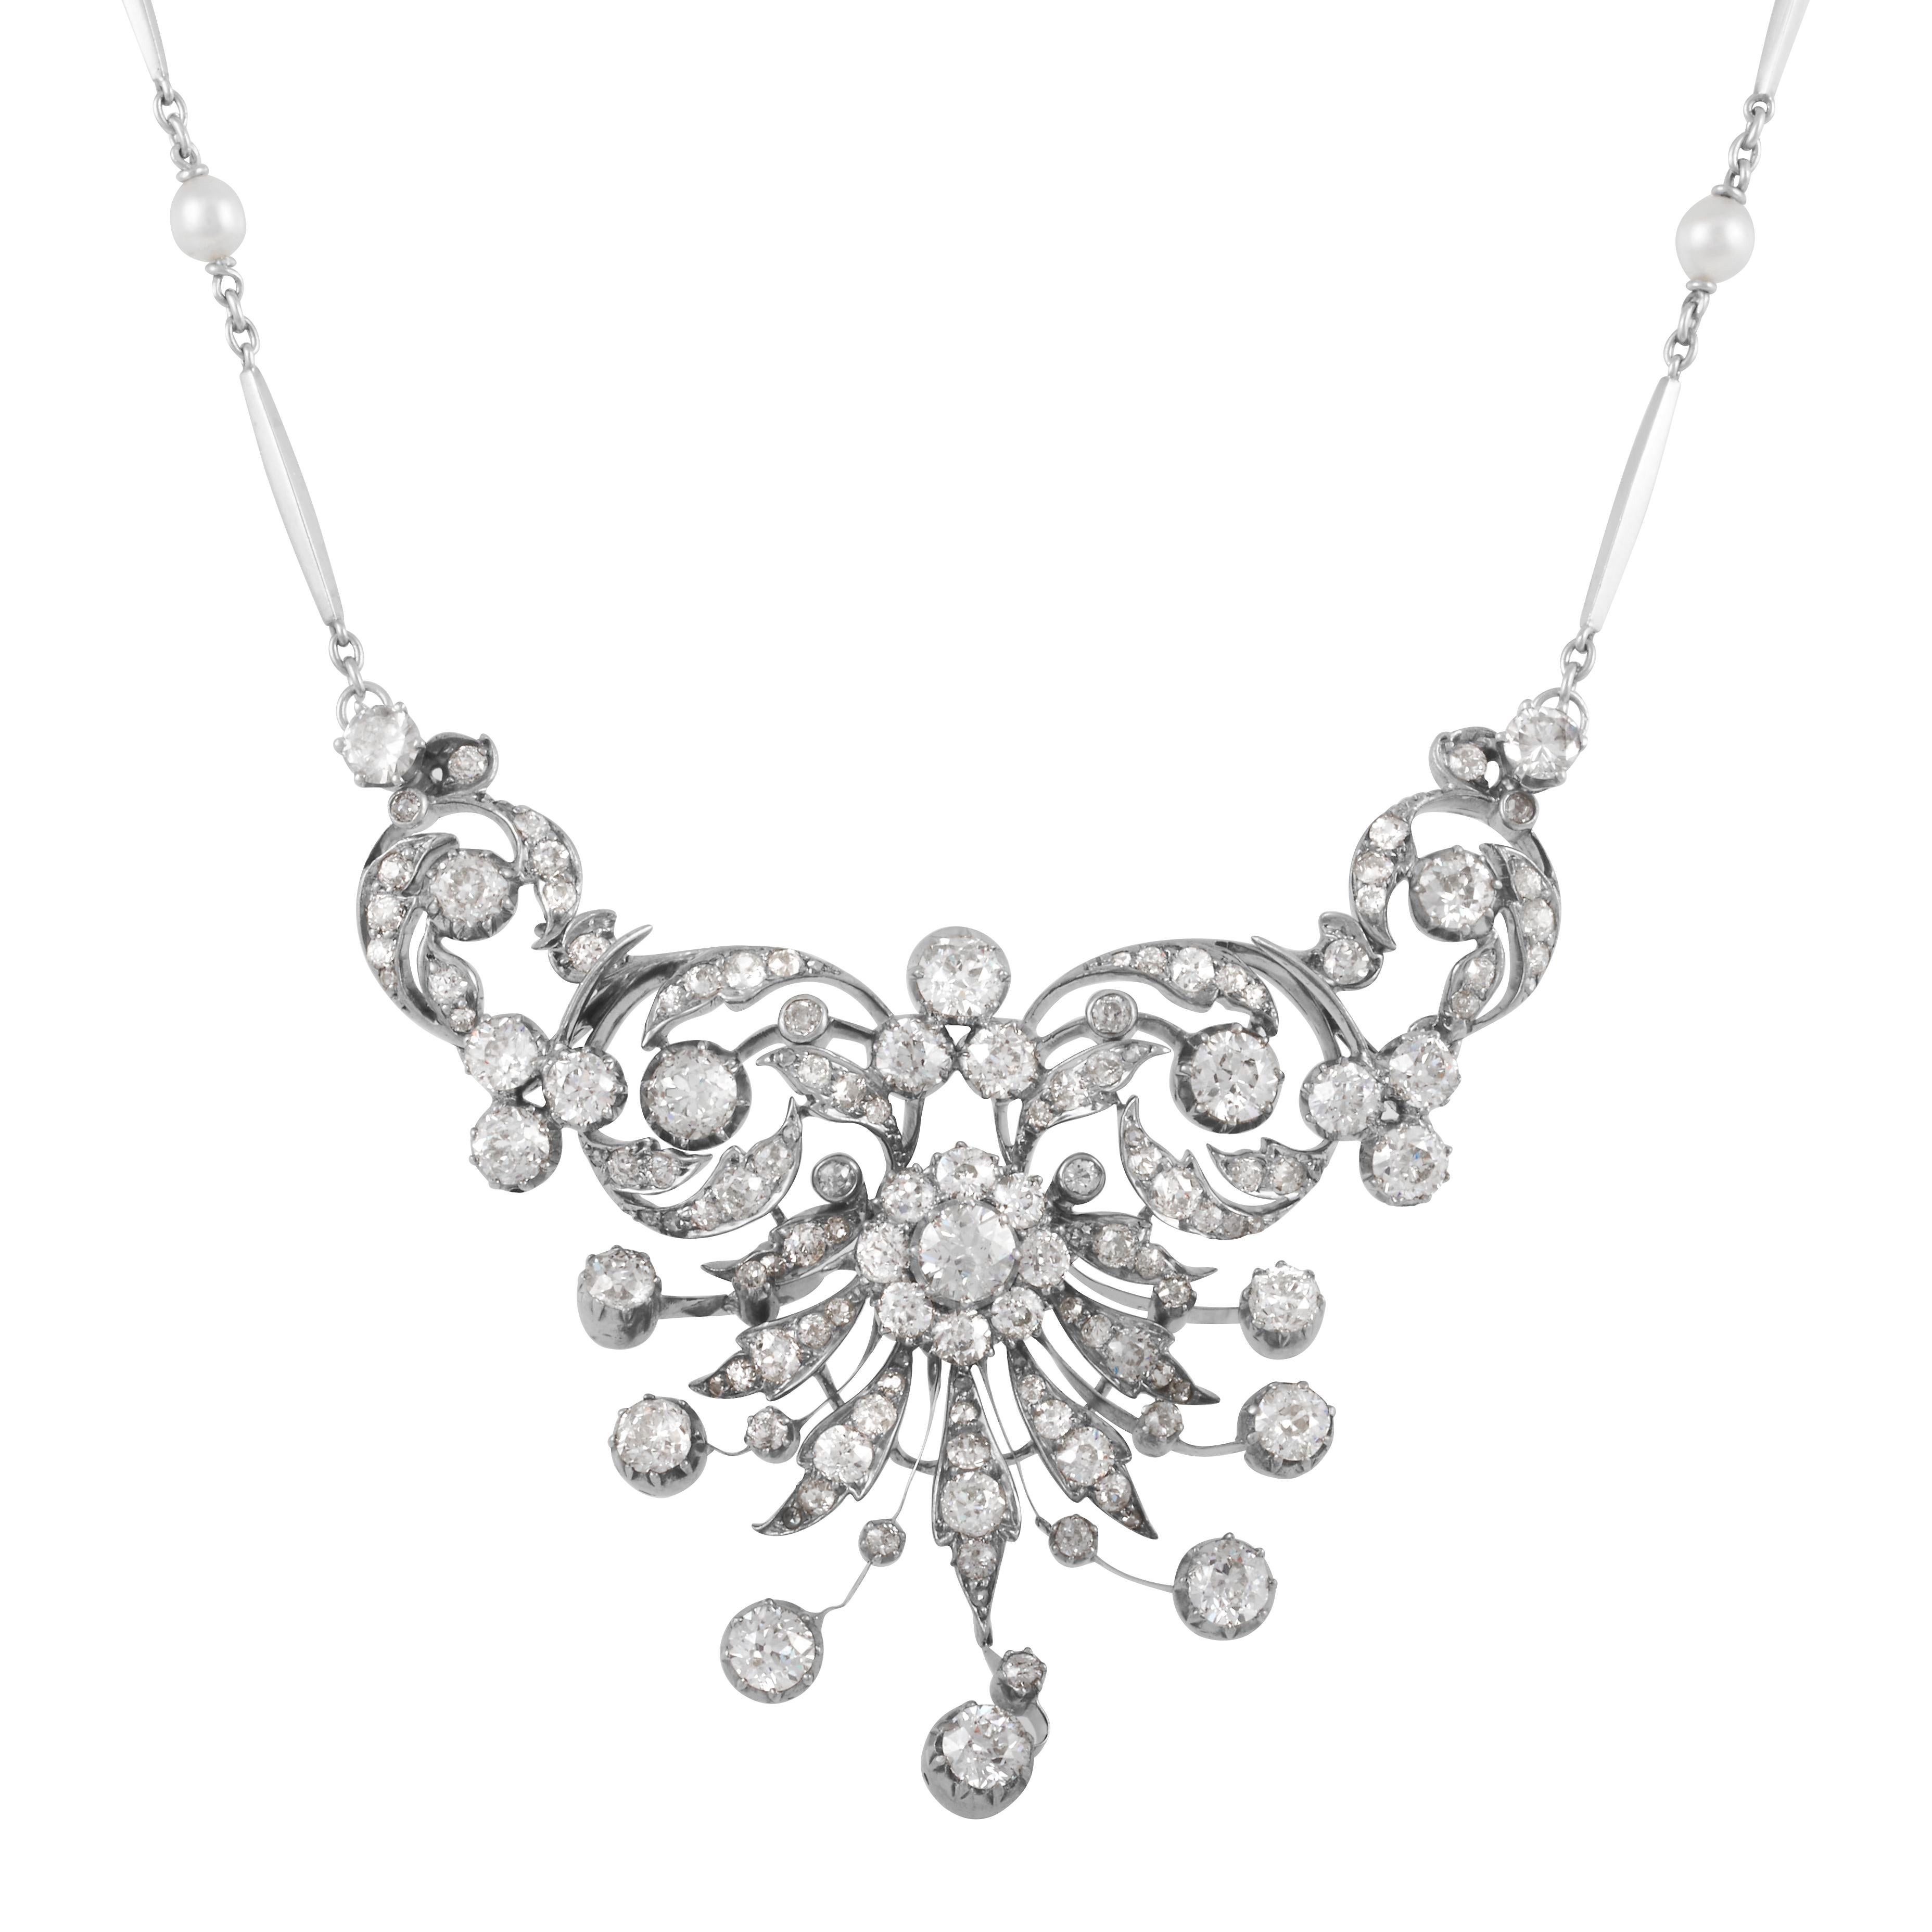 This antique necklace features a mix of Old Mine Cut, Old European Cut, and Single Cut diamonds totaling approximately 10.50 carats with H-I-J color and VS2-SI2 clarity.  The setting of the necklace is silver on 14k yellow gold, it hangs from a